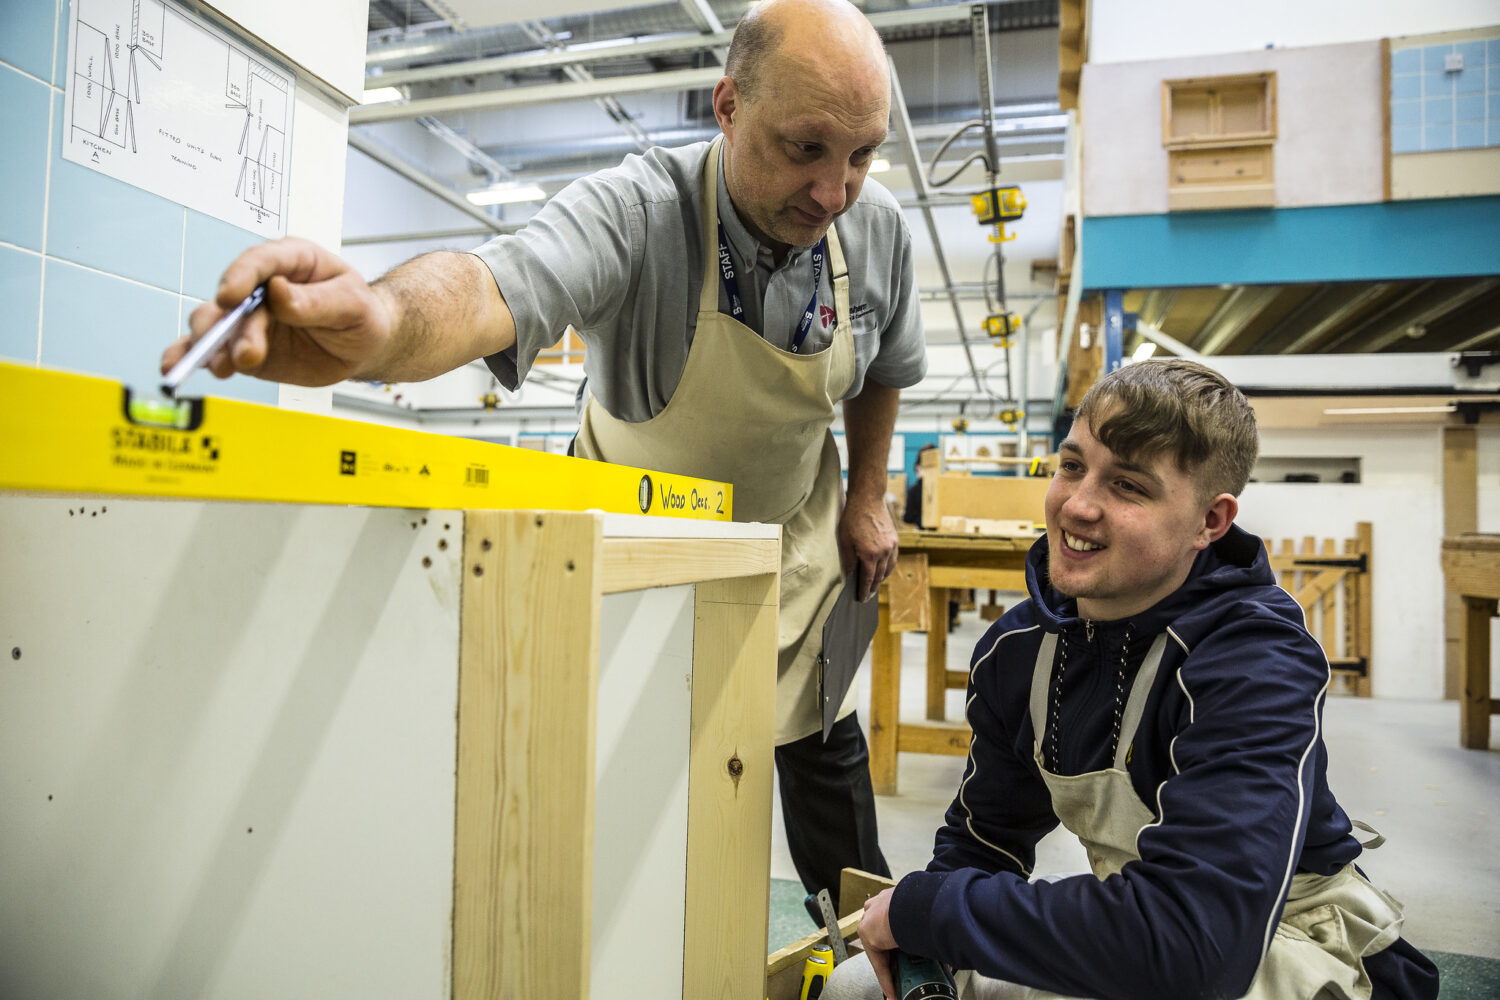 Carpentry And Joinery Site Carpentry Pathway Advanced Apprenticeship Level 3 Standard Bc117 Bedford College